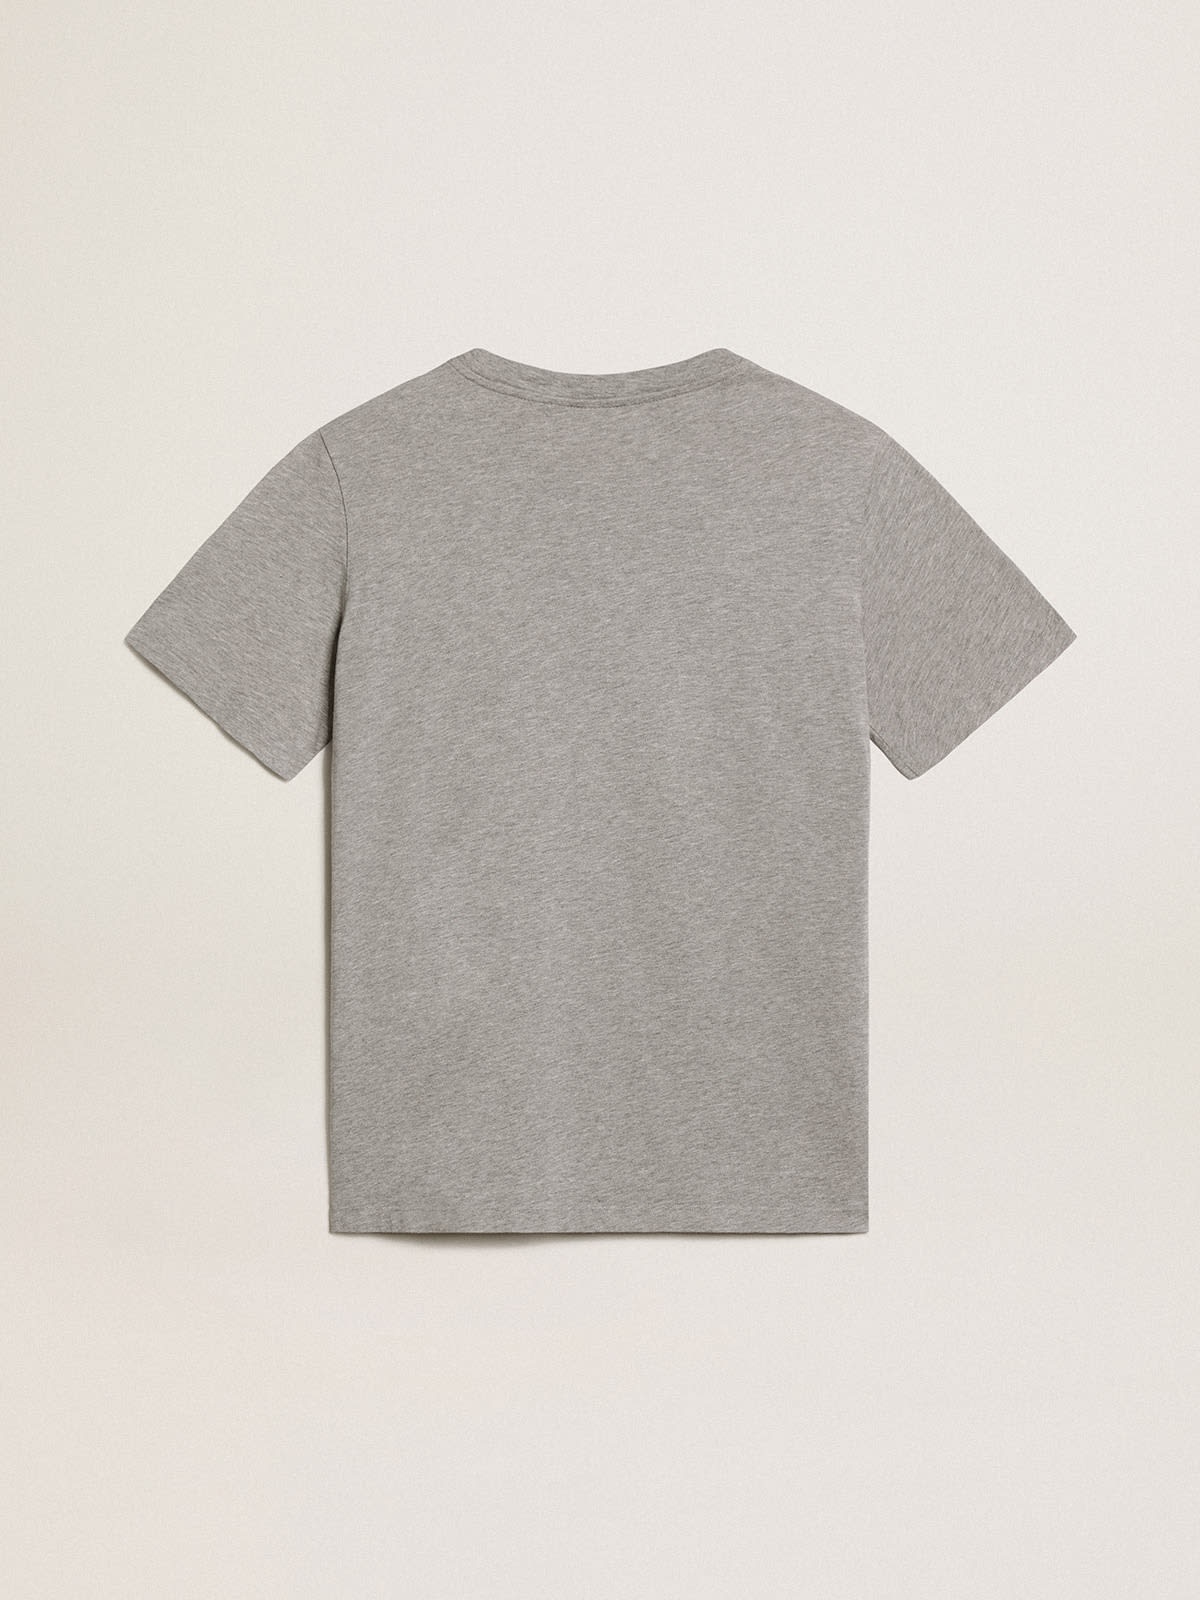 Women's mélange gray T-shirt with gold star on the front - 2